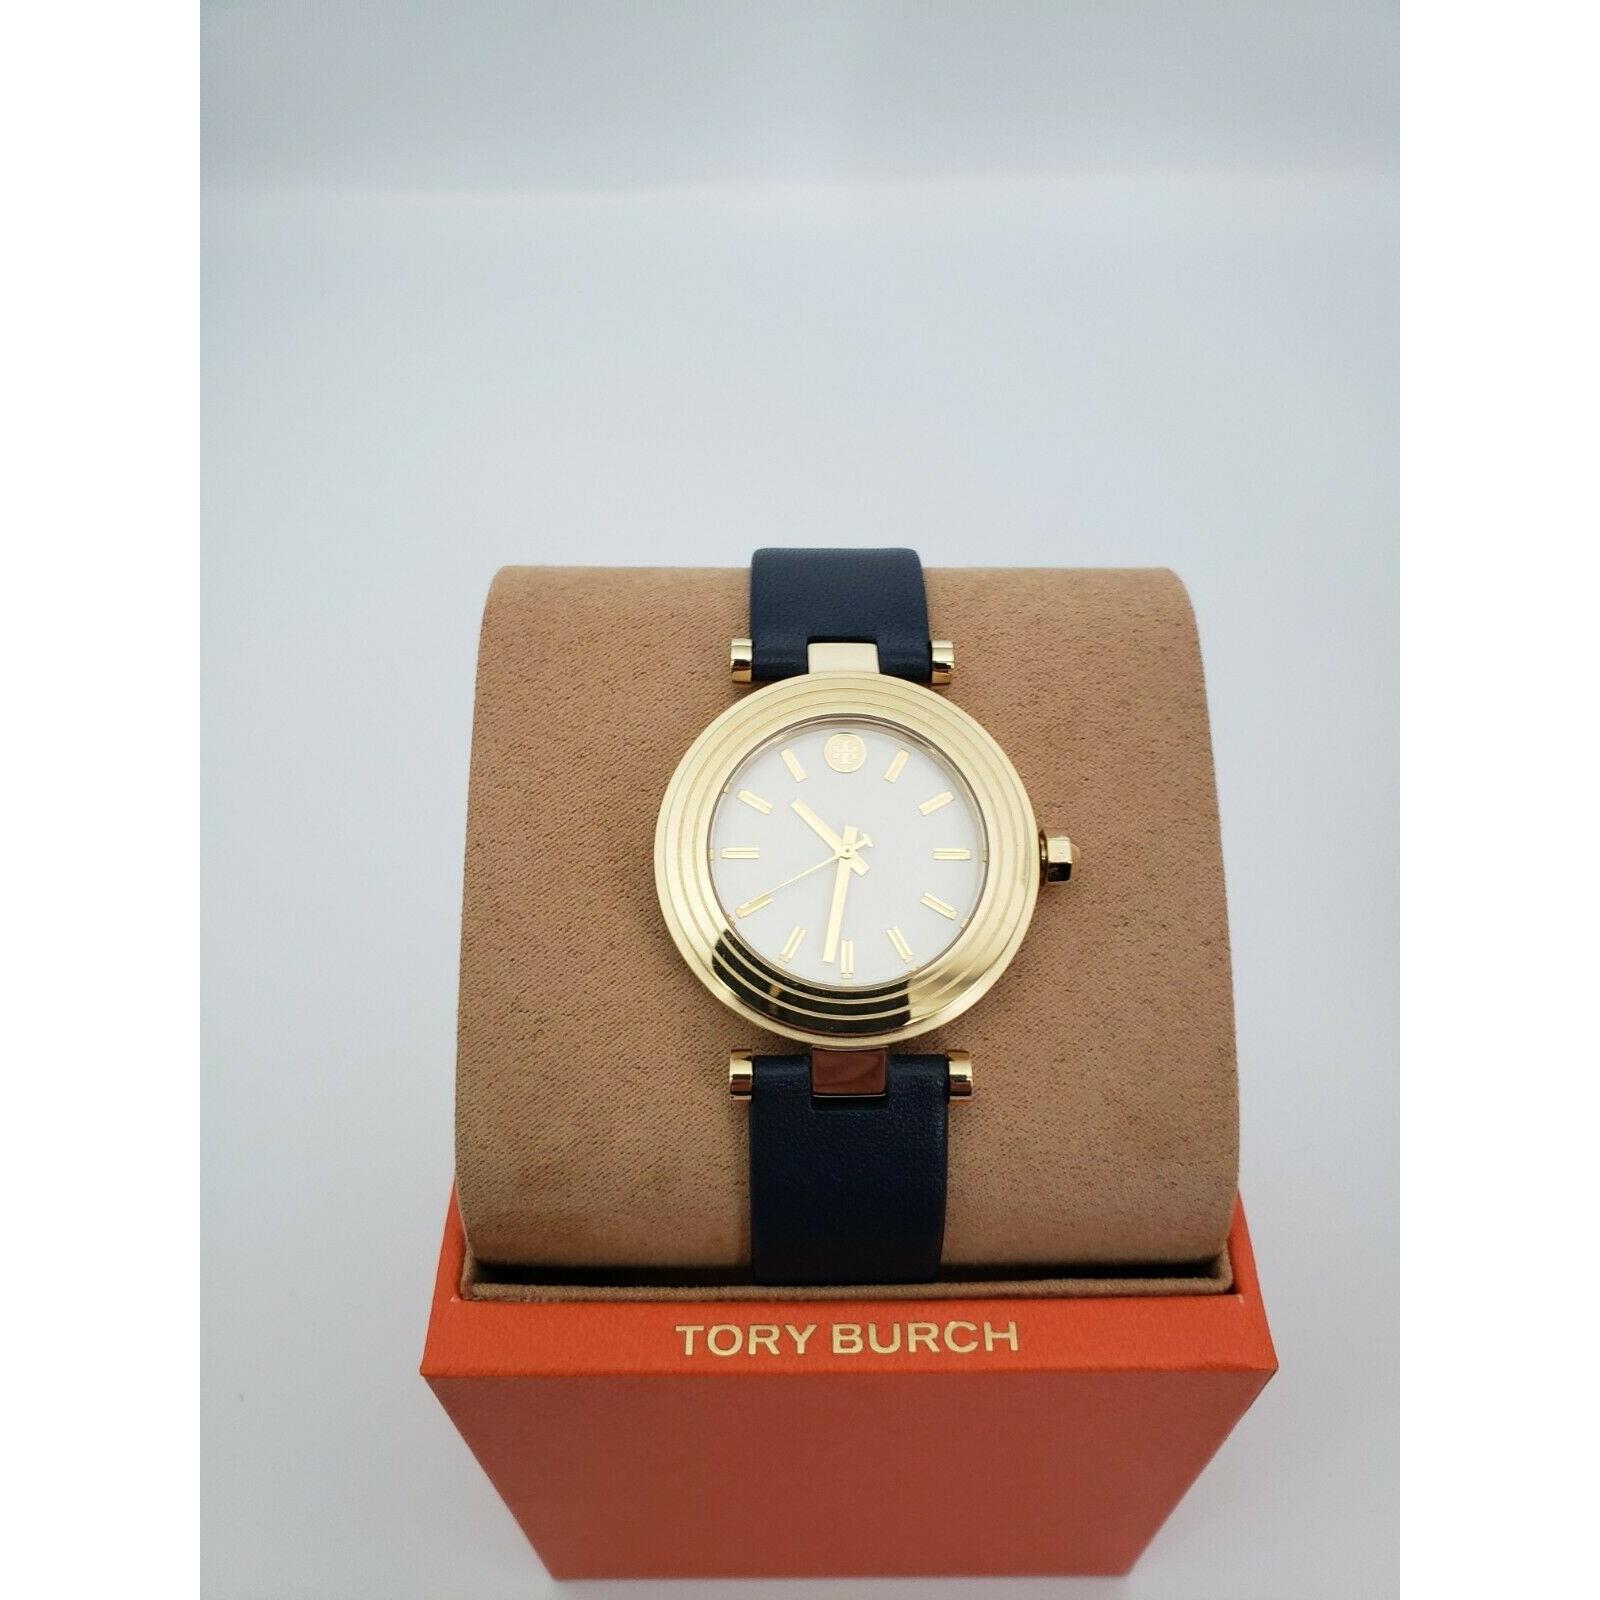 Tory Burch watch Classic - Ivory Dial, Blue Band, Gold Bezel